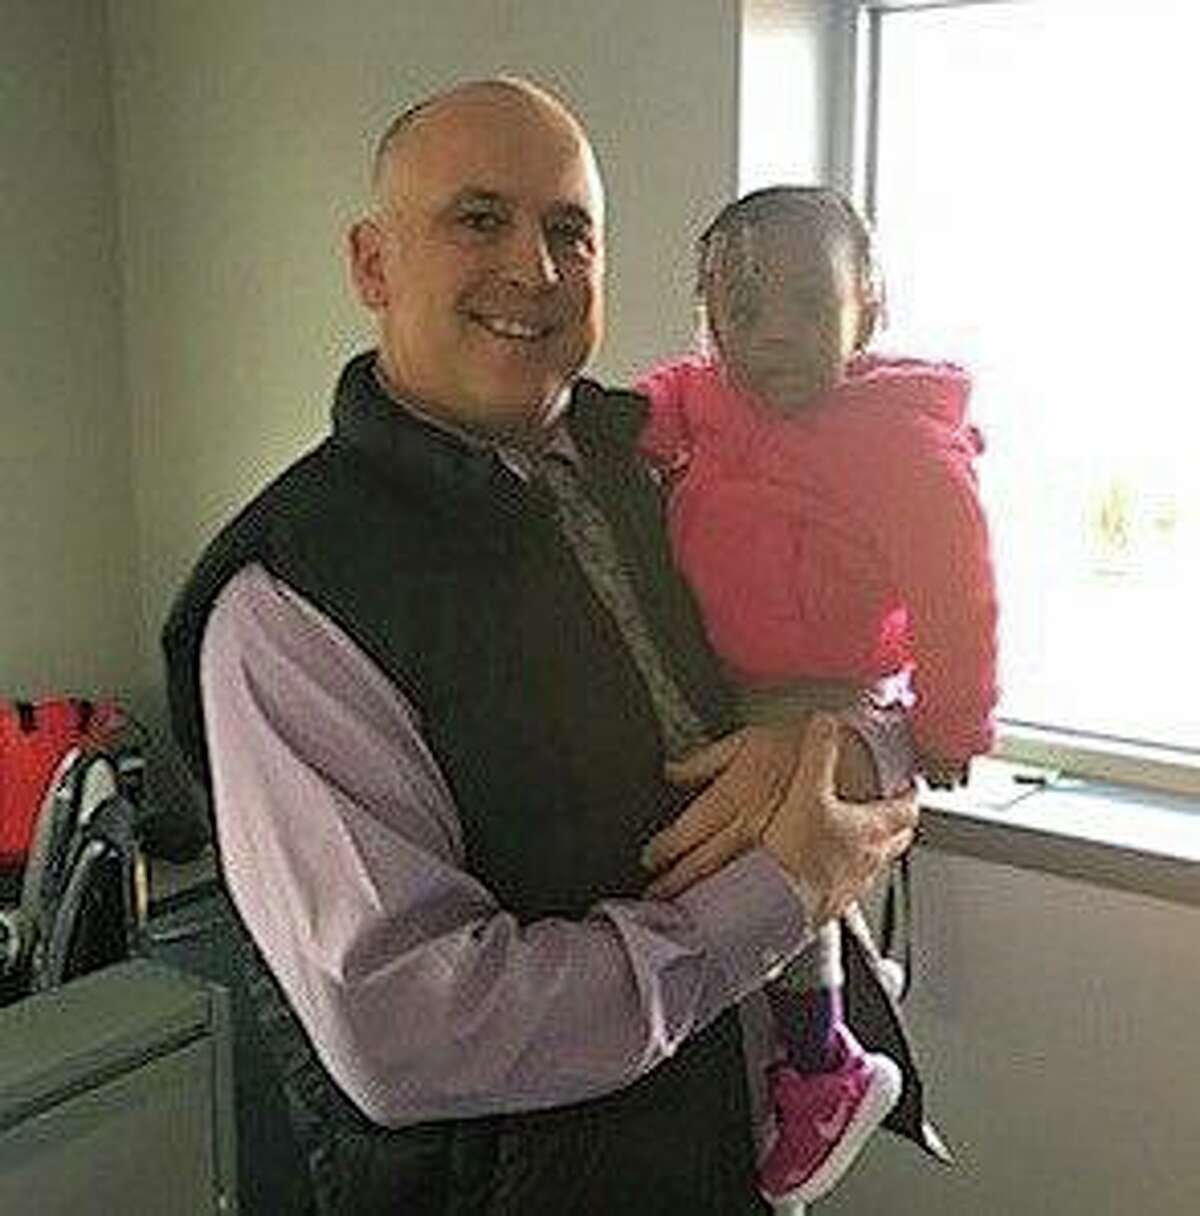 Detective Michael Harton with 1-year-old Eimann, the child he saved last March.